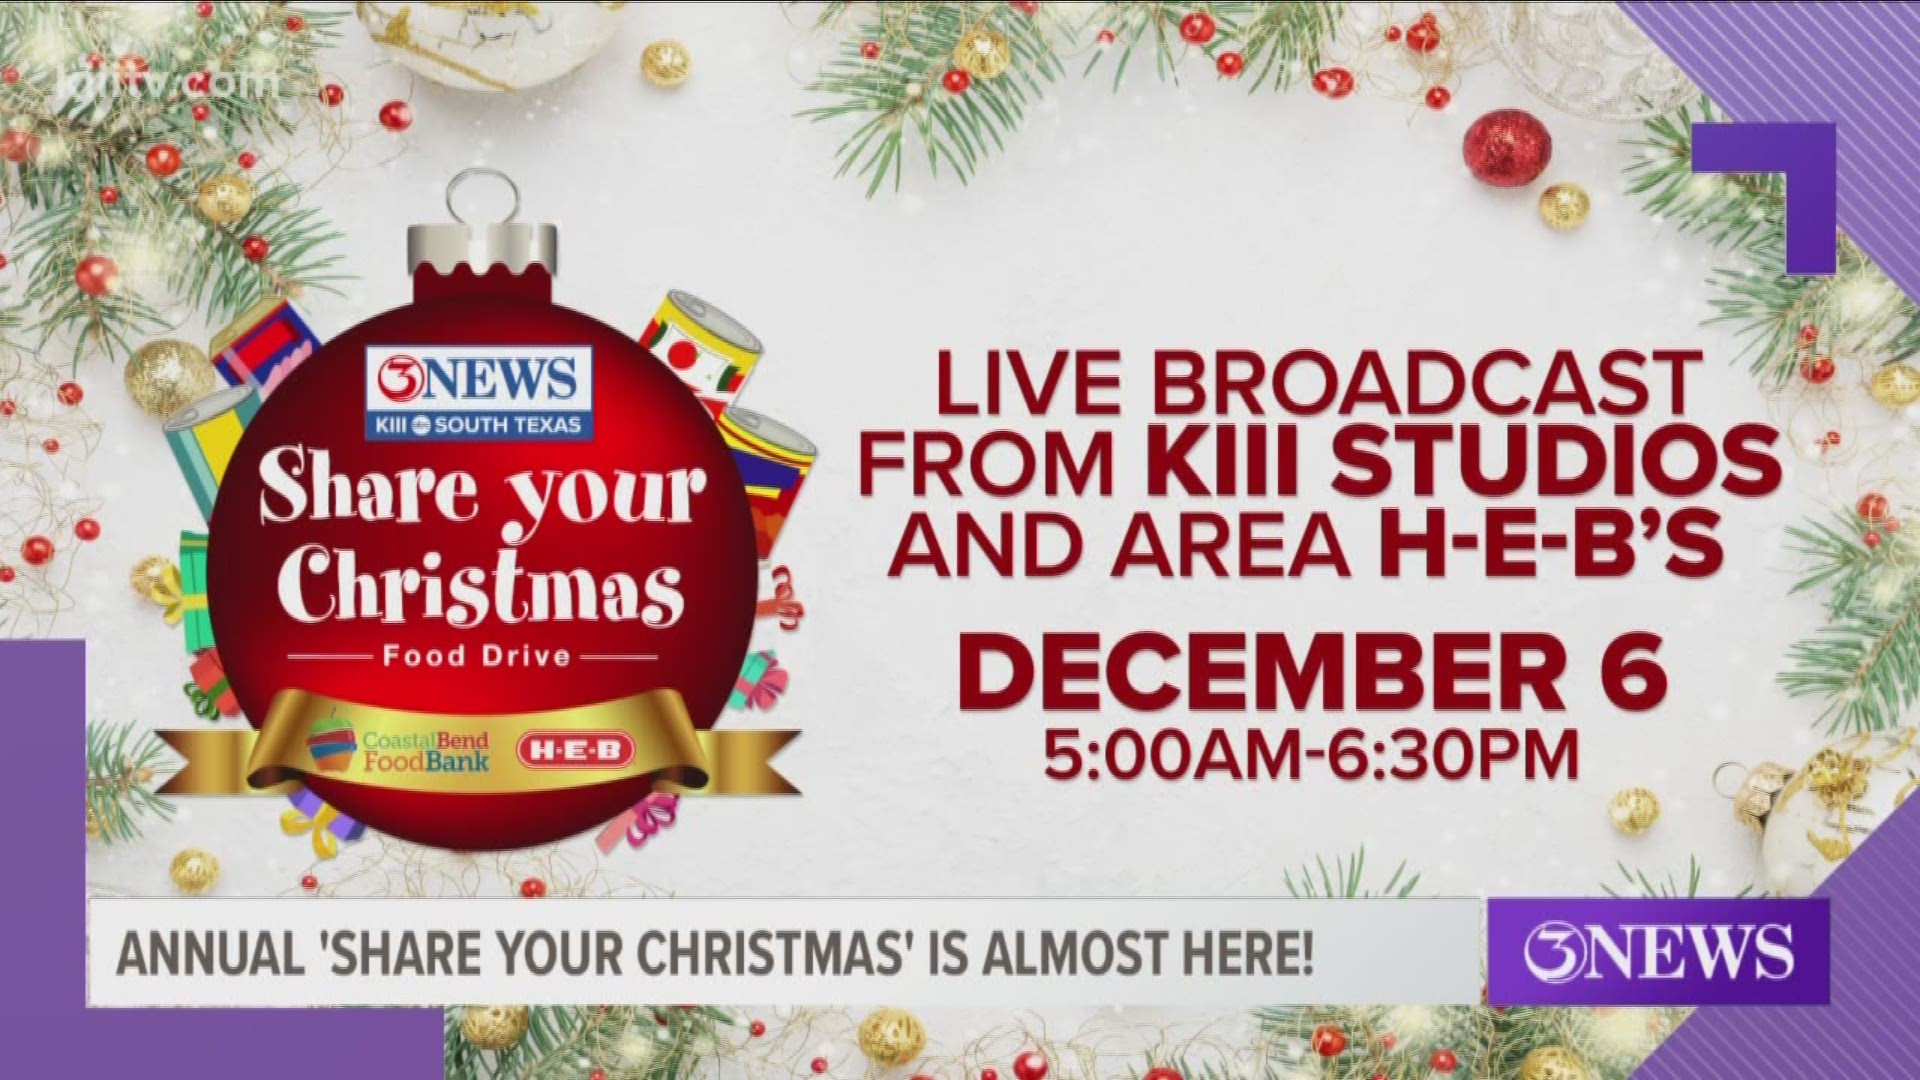 This Friday, KIII-TV is kicking off its annual Share Your Christmas Food Drive benefiting the Coastal Bend Food Bank.